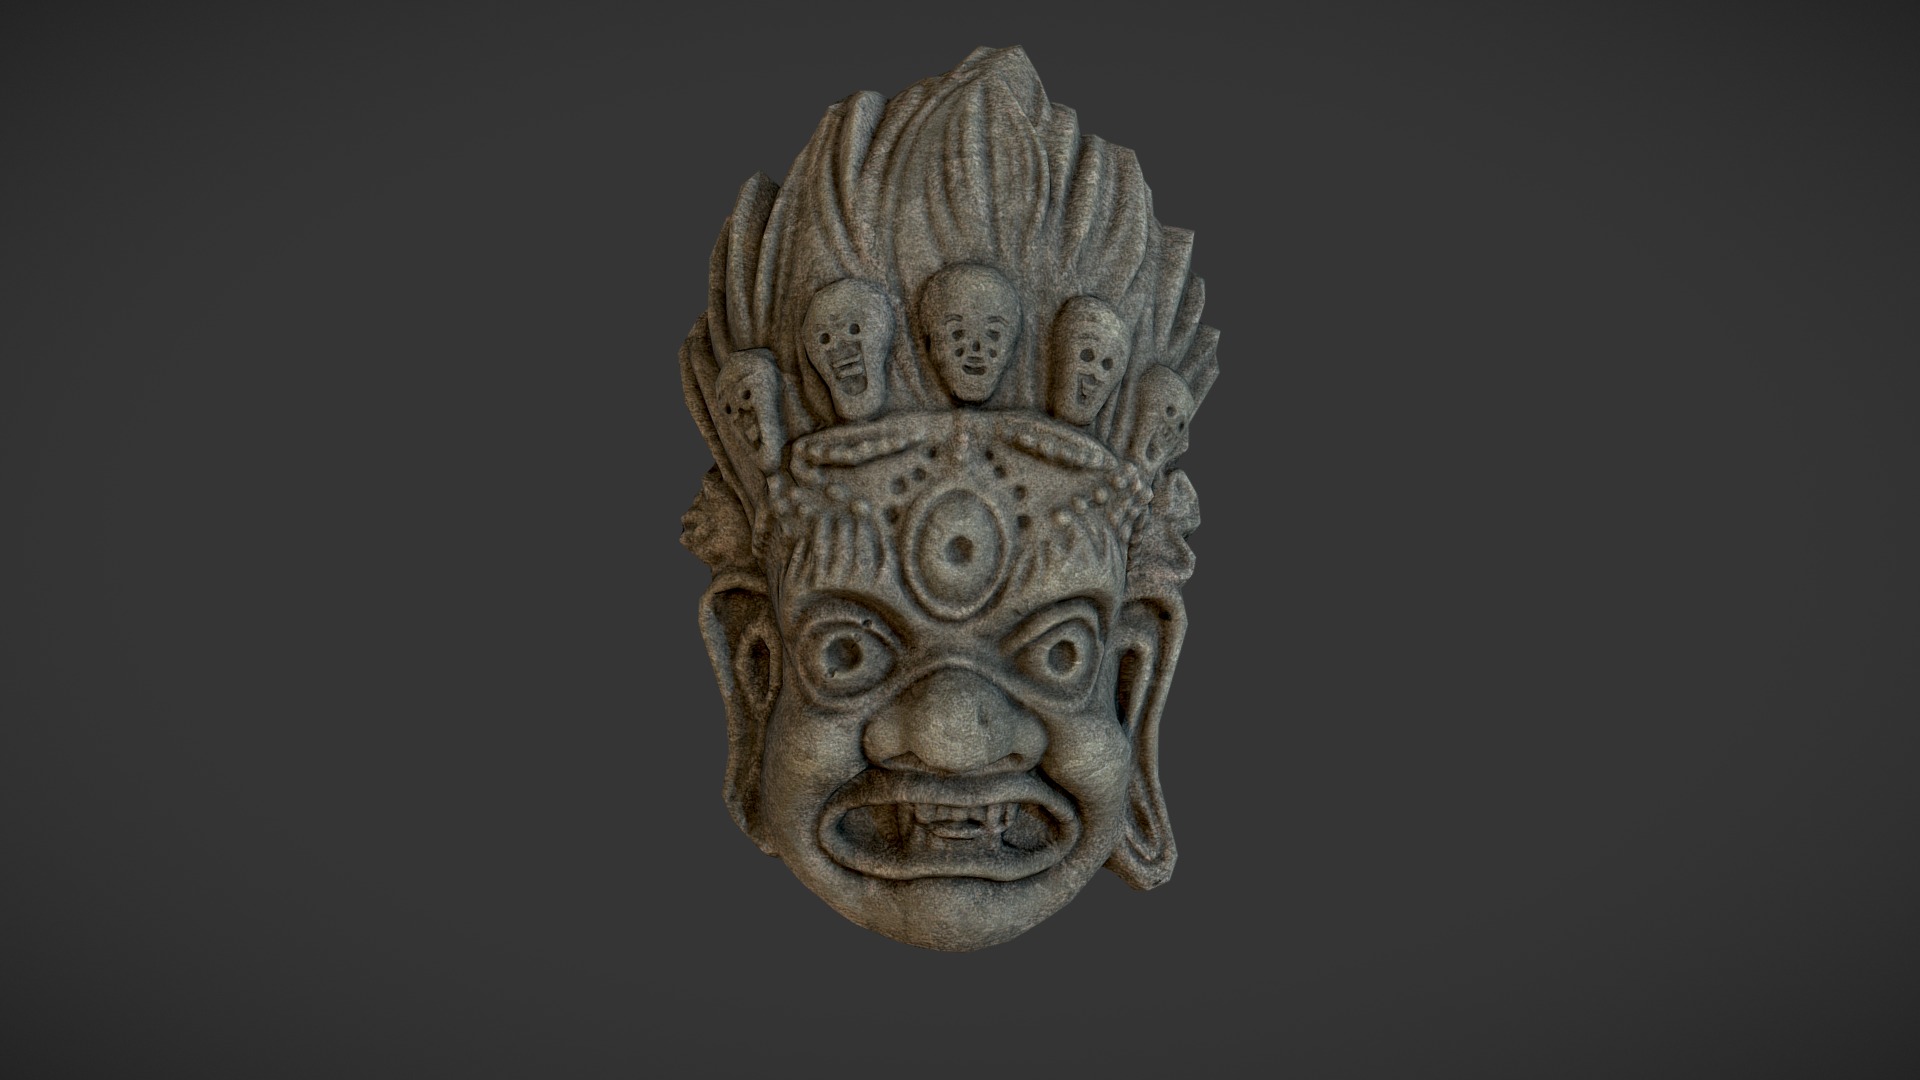 3D model Maya Tribal Mask - This is a 3D model of the Maya Tribal Mask. The 3D model is about a stone sculpture of a person.